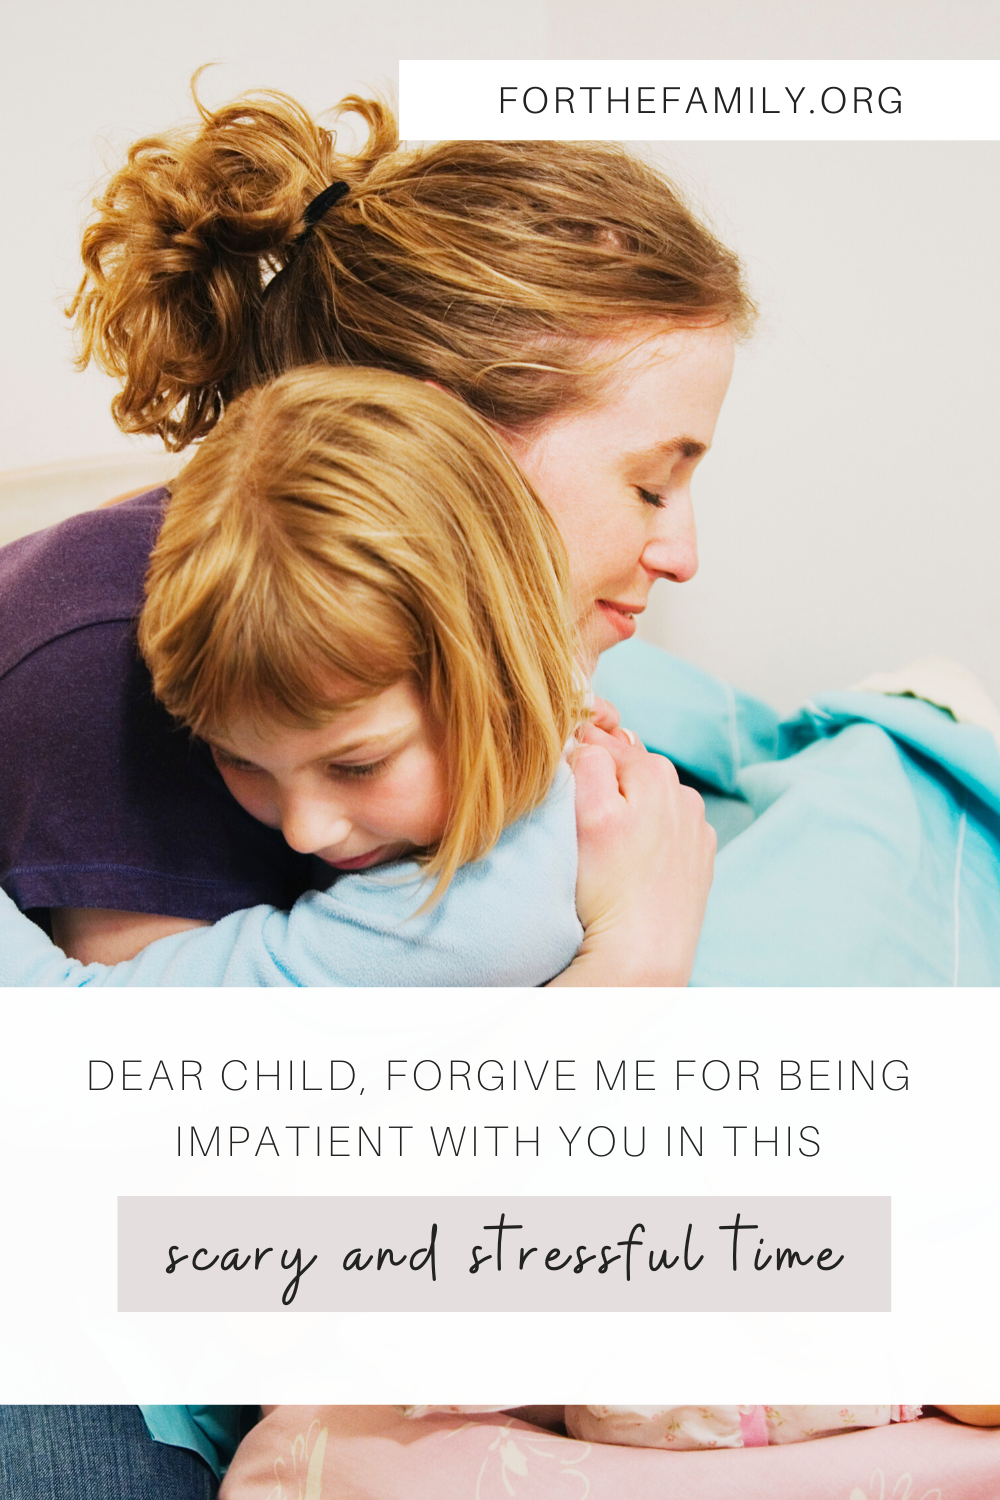 Dear Child, Forgive me for being impatient with you in this scary and stressful time